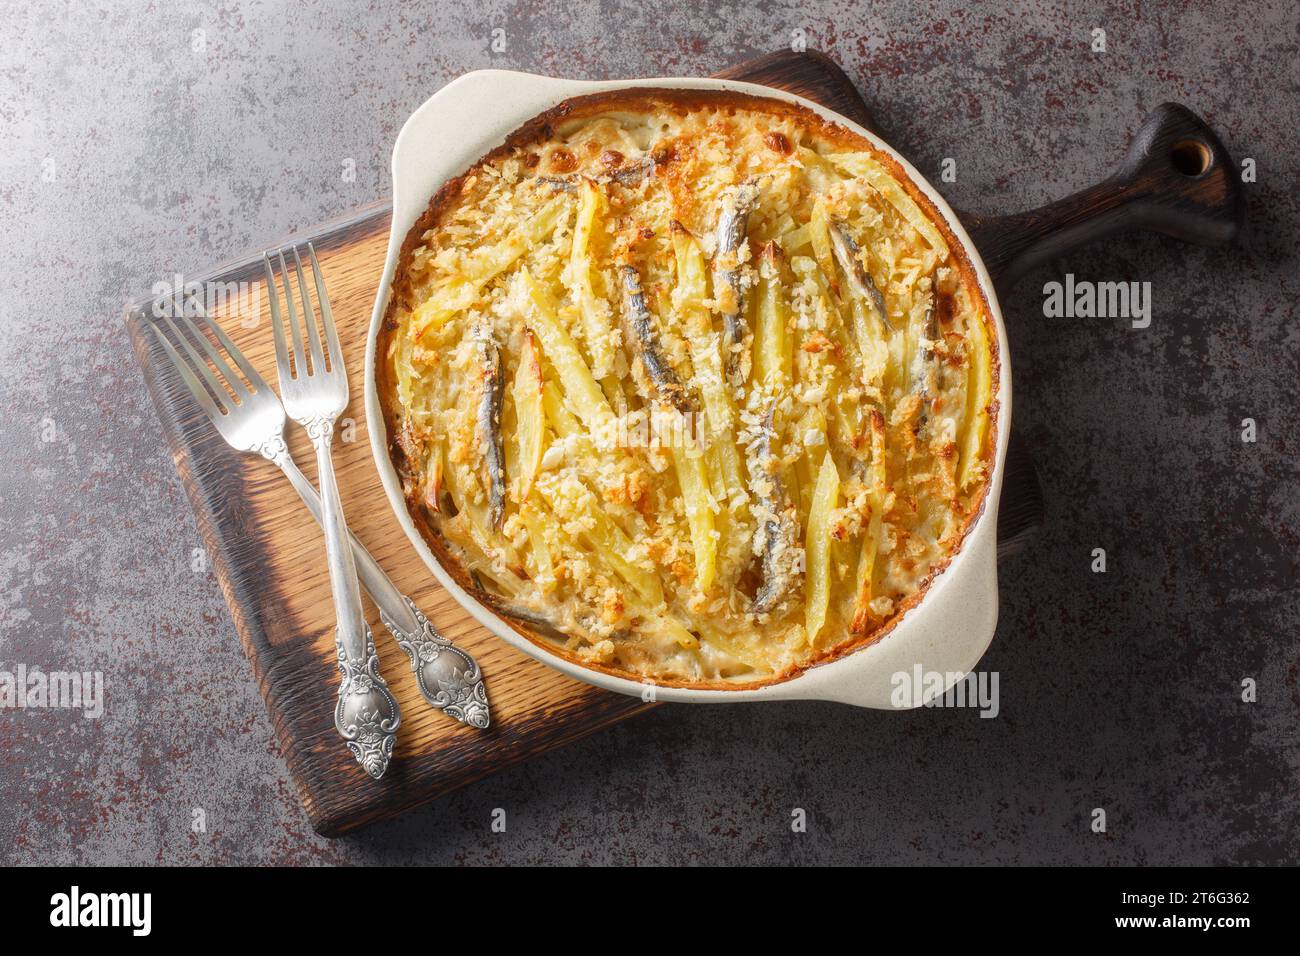 Janssons frestelse or Jansson's temptation is a creamy potato casserole traditionally served at Christmas in Sweden closeup on the baking dish on the Stock Photo